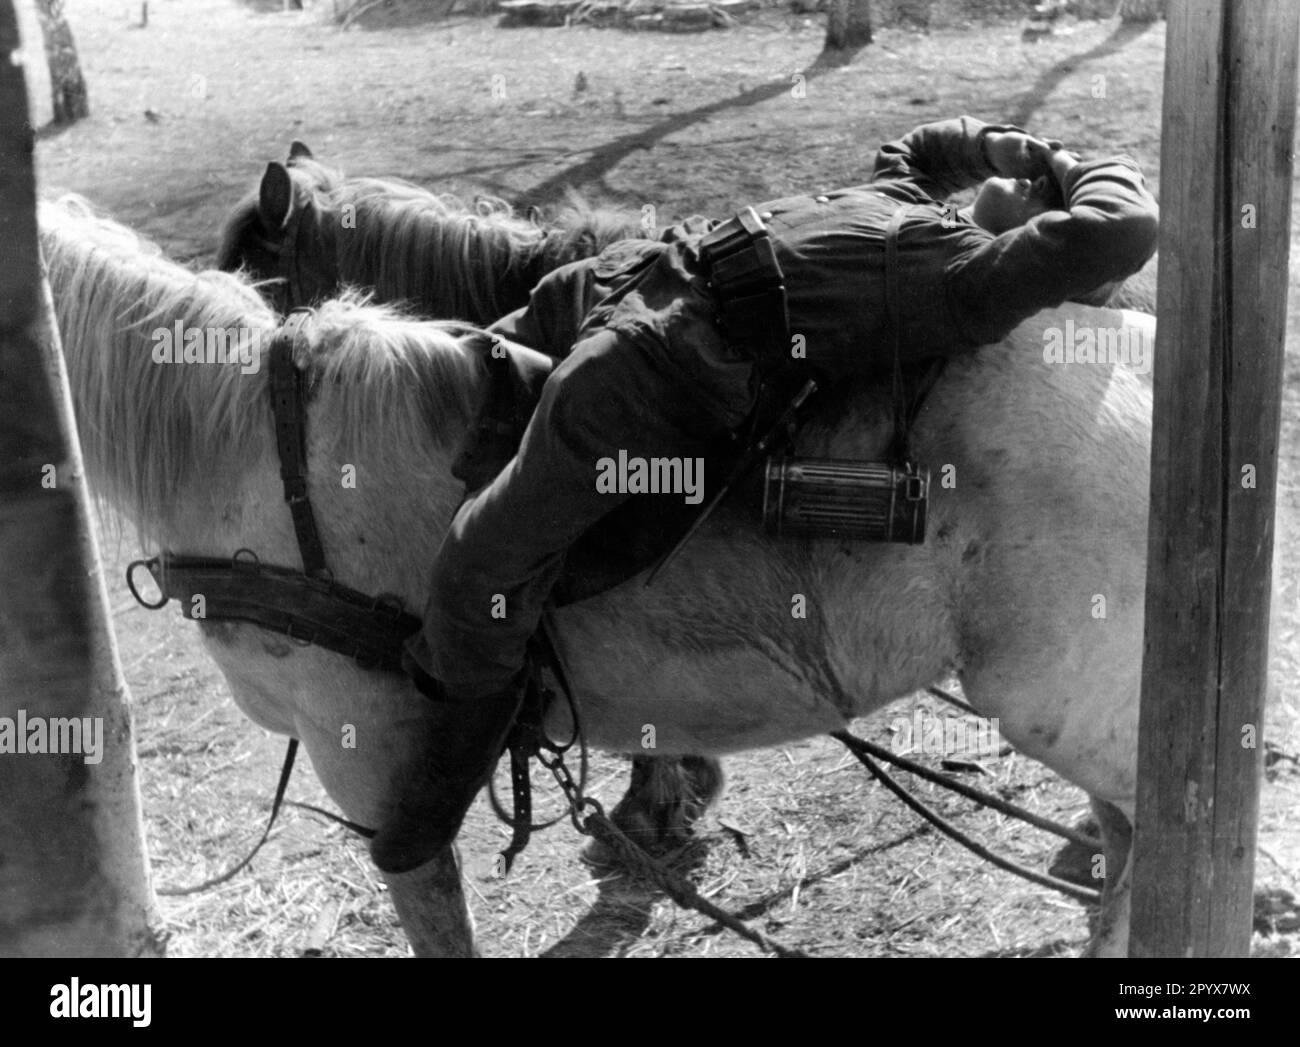 A German soldier has reclined on the back of a horse and is sleeping during the advance on the Eastern Front in the summer of 1941. [automated translation] Stock Photo